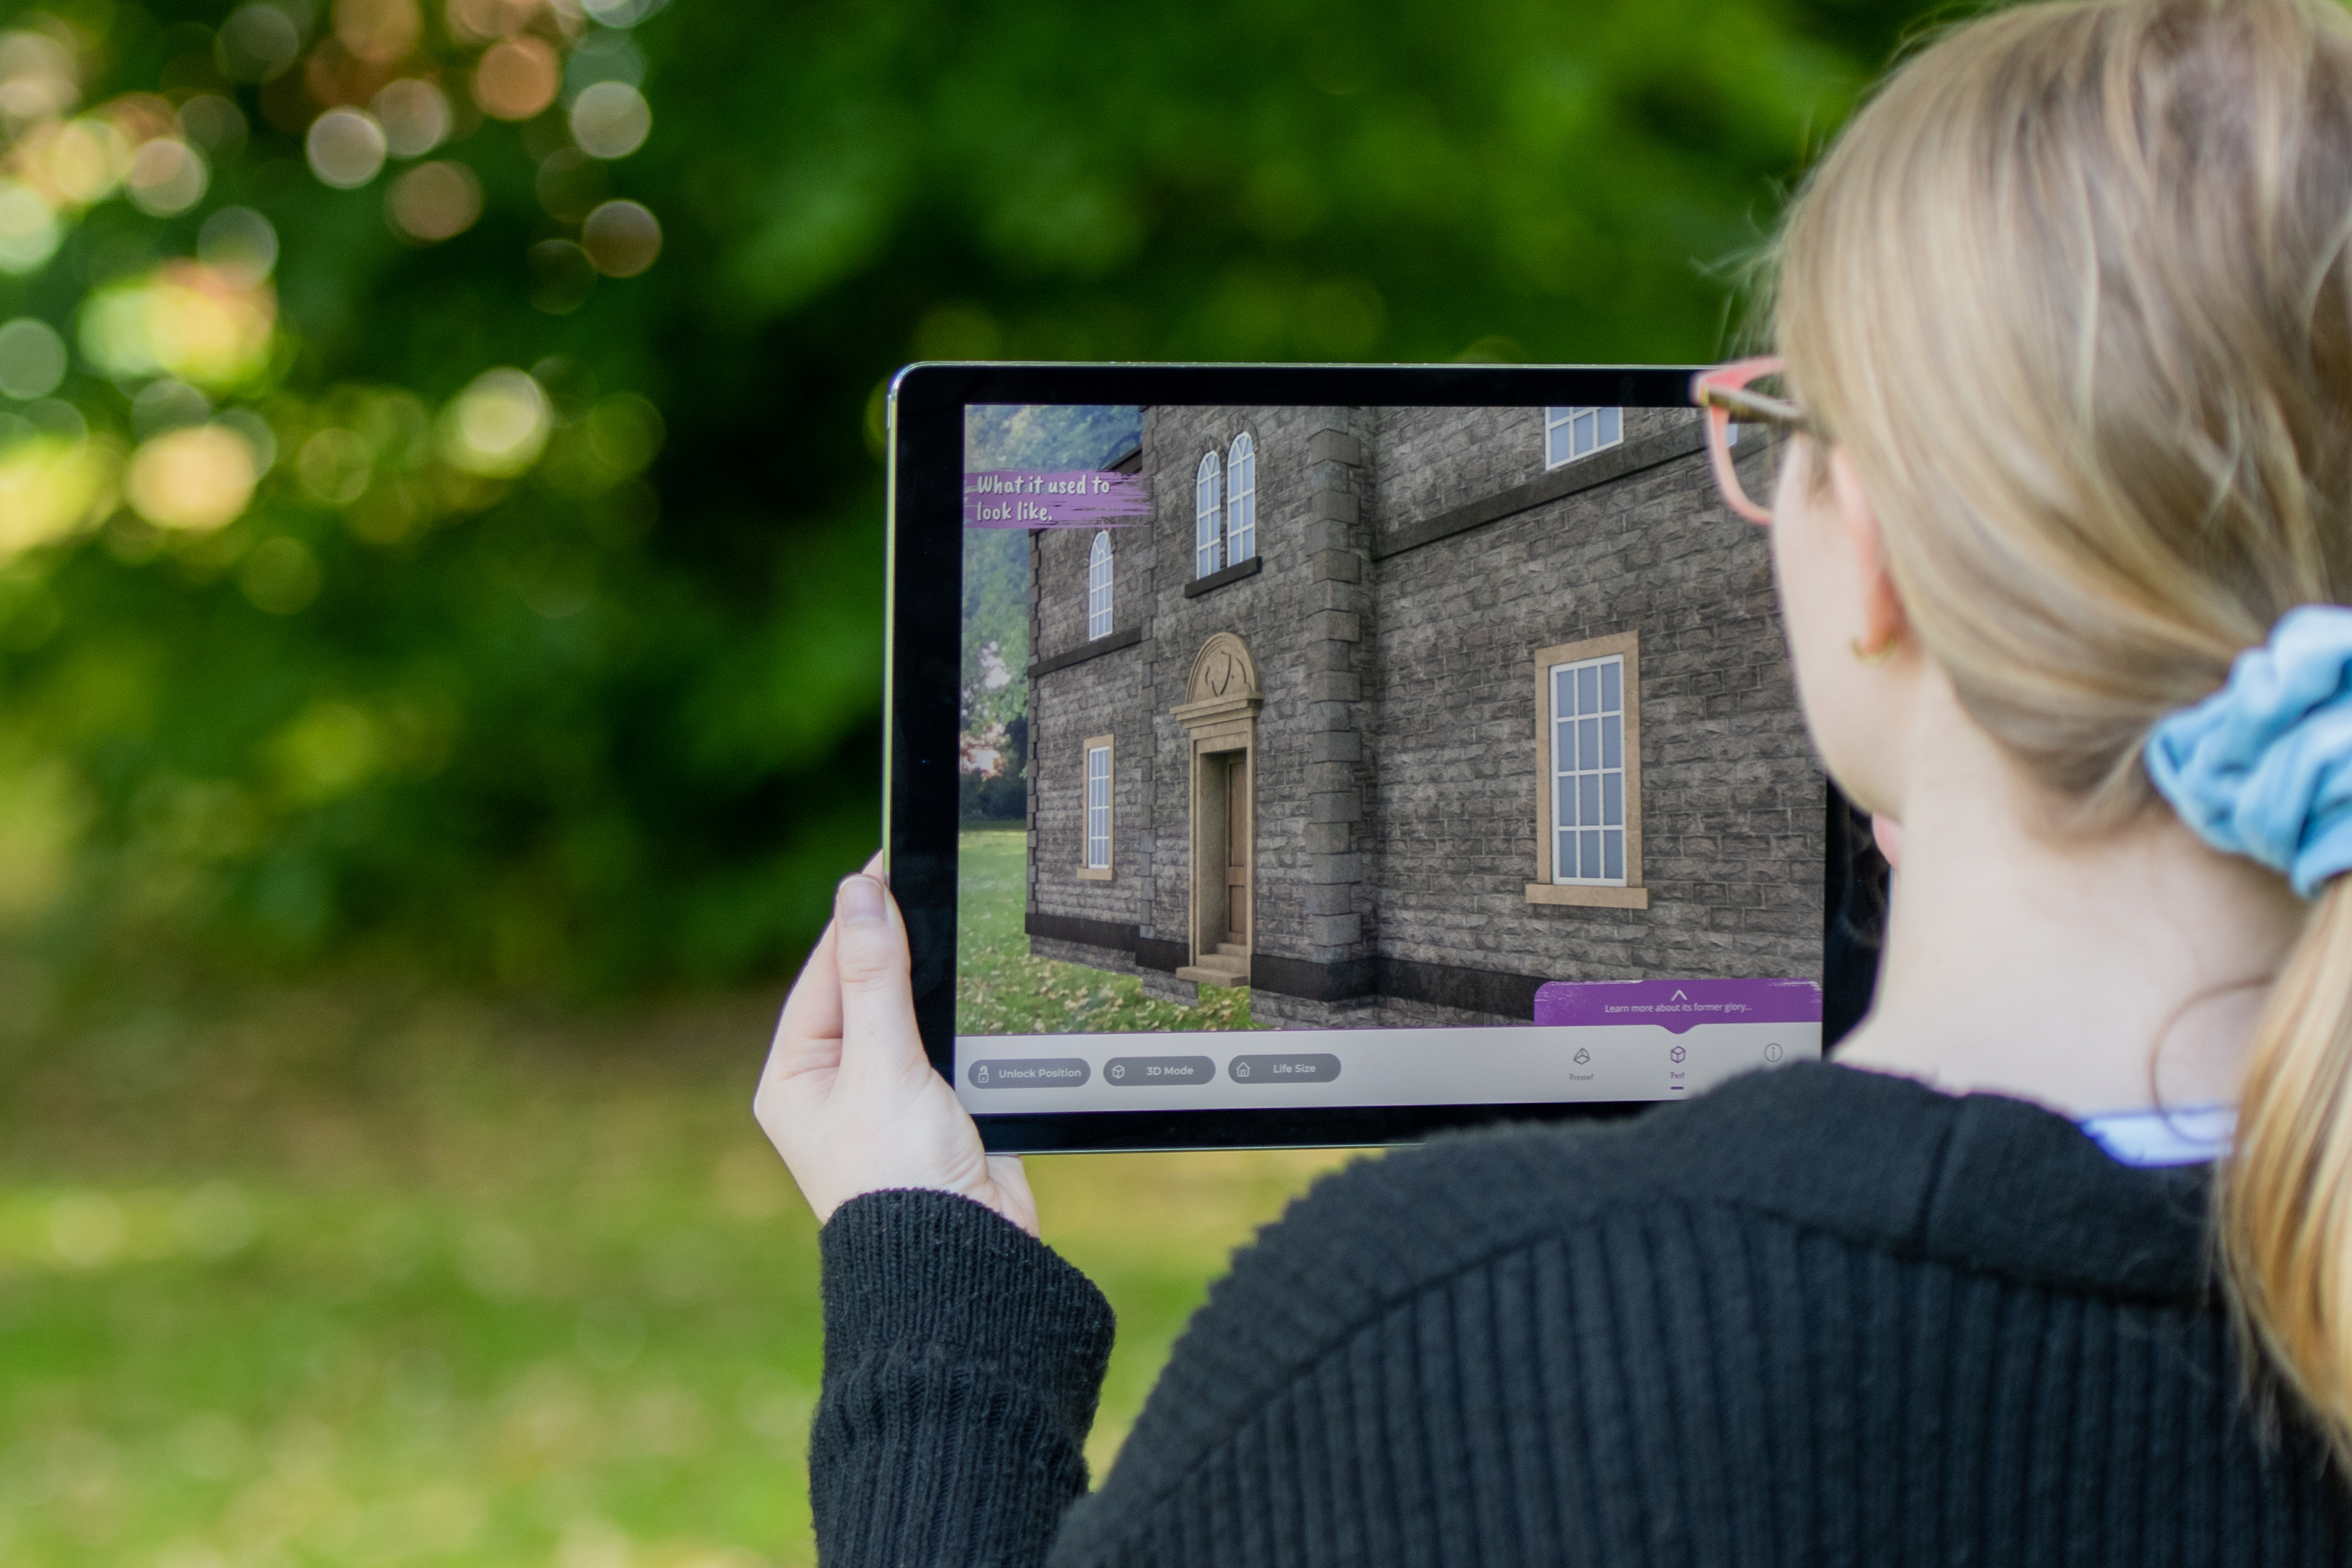 Errwood Hall AR App Launched and Featured by BBC News